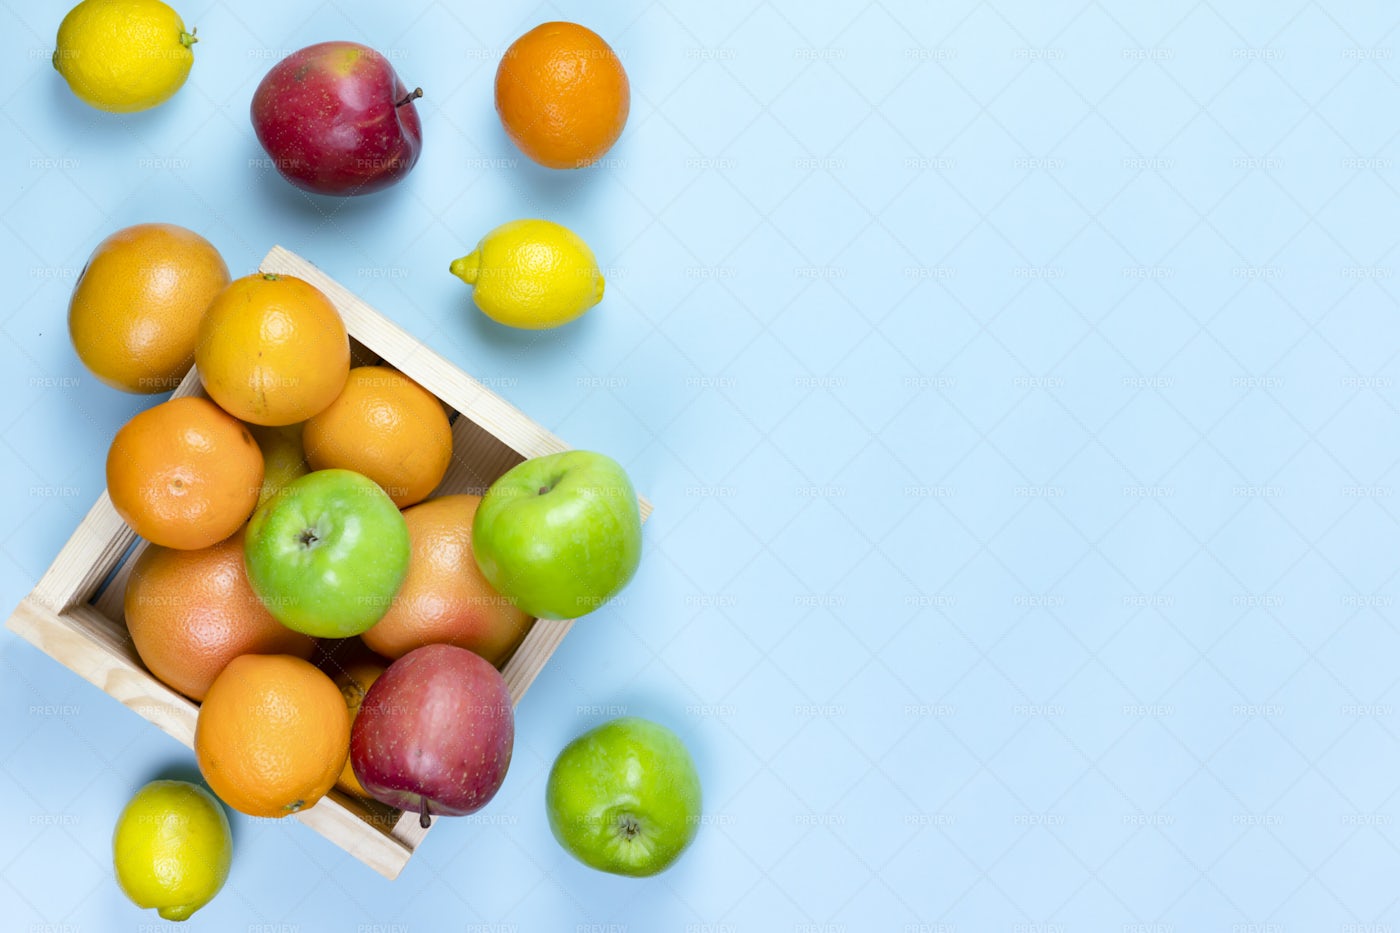 Fruits In Wooden Box: Stock Photos